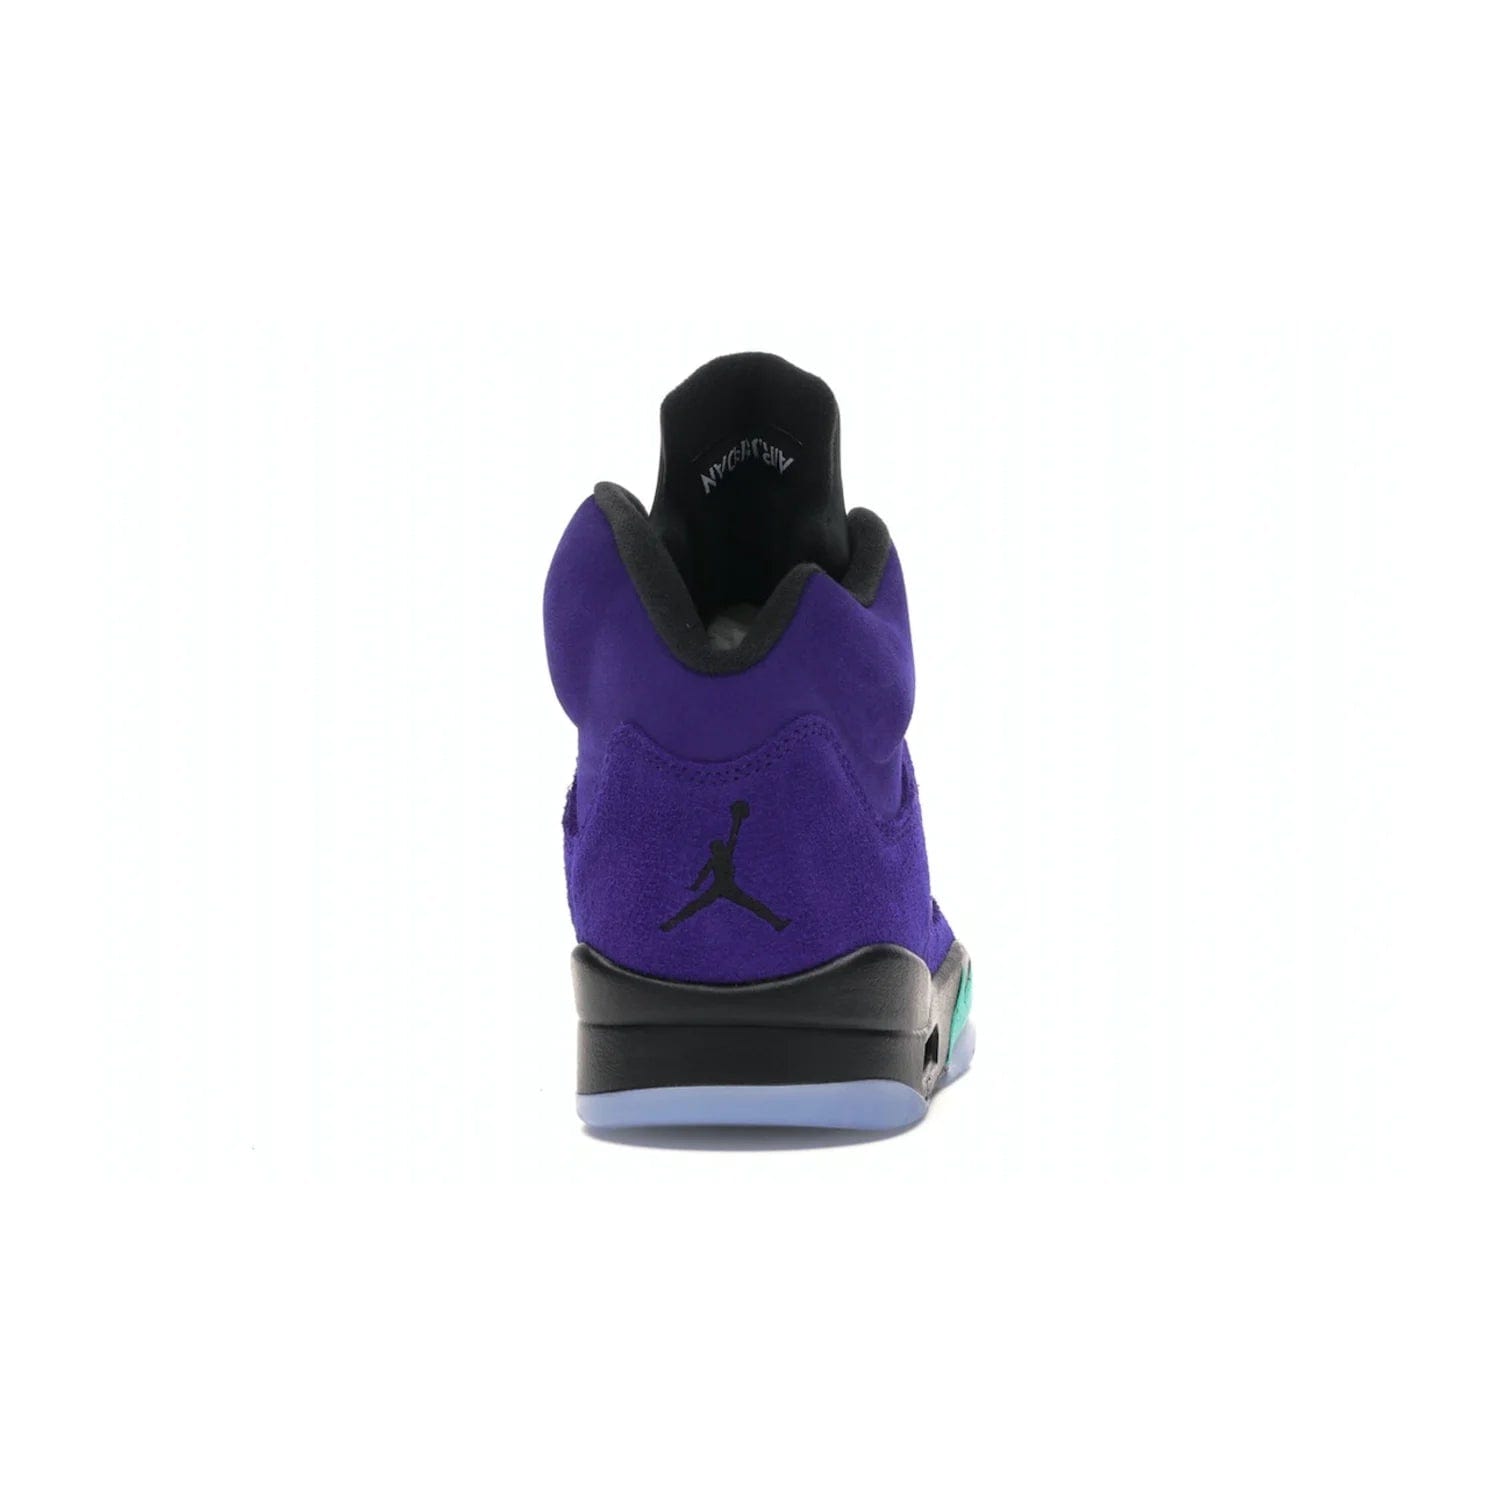 Jordan 5 Retro Alternate Grape - Image 28 - Only at www.BallersClubKickz.com - Bring the classic Jordan 5 Retro Alternate Grape to your sneaker collection! Featuring a purple suede upper, charcoal underlays, green detailing, and an icy and green outsole. Releasing for the first time since 1990, don't miss this chance to add a piece of sneaker history to your collection.